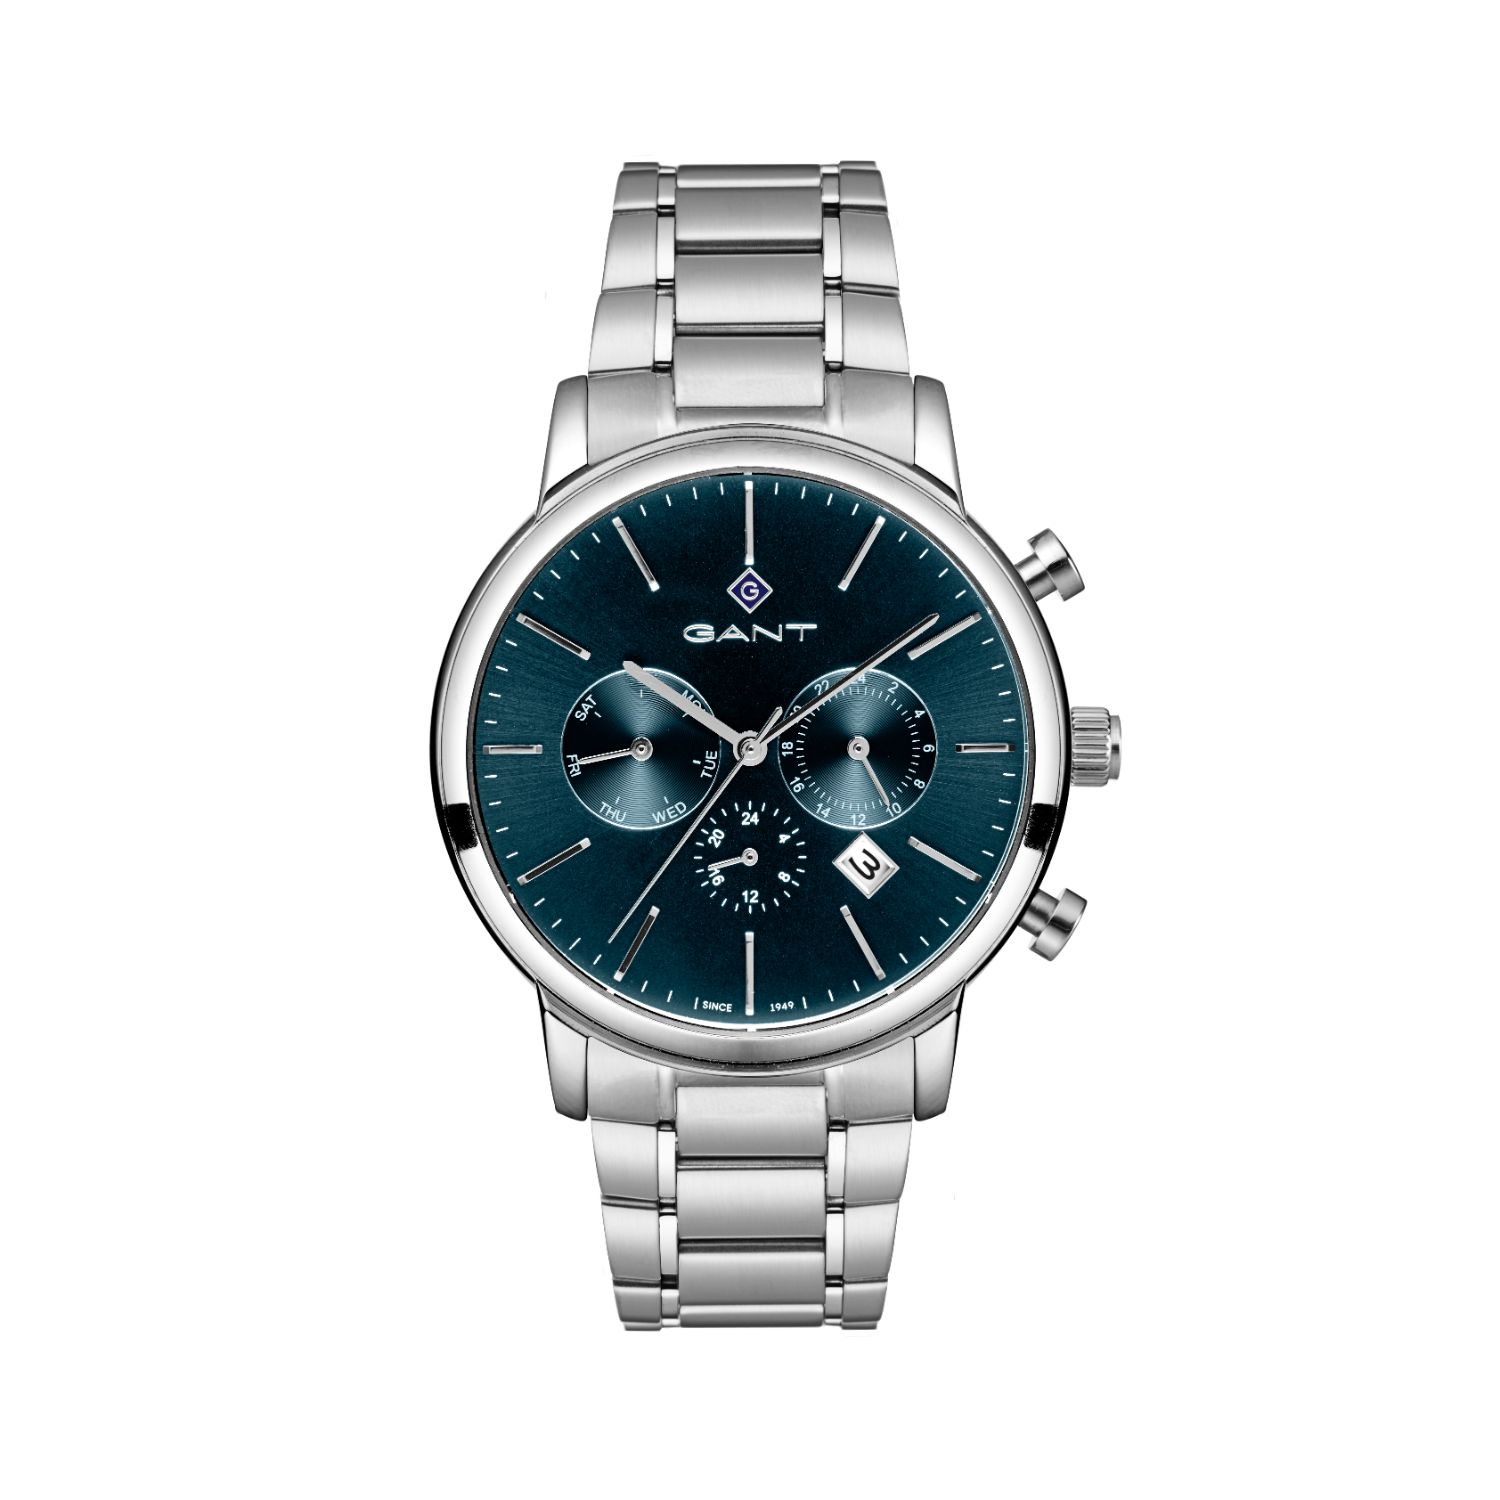 Mens GANT stainless steel watch with blue dial and silver bracelet.